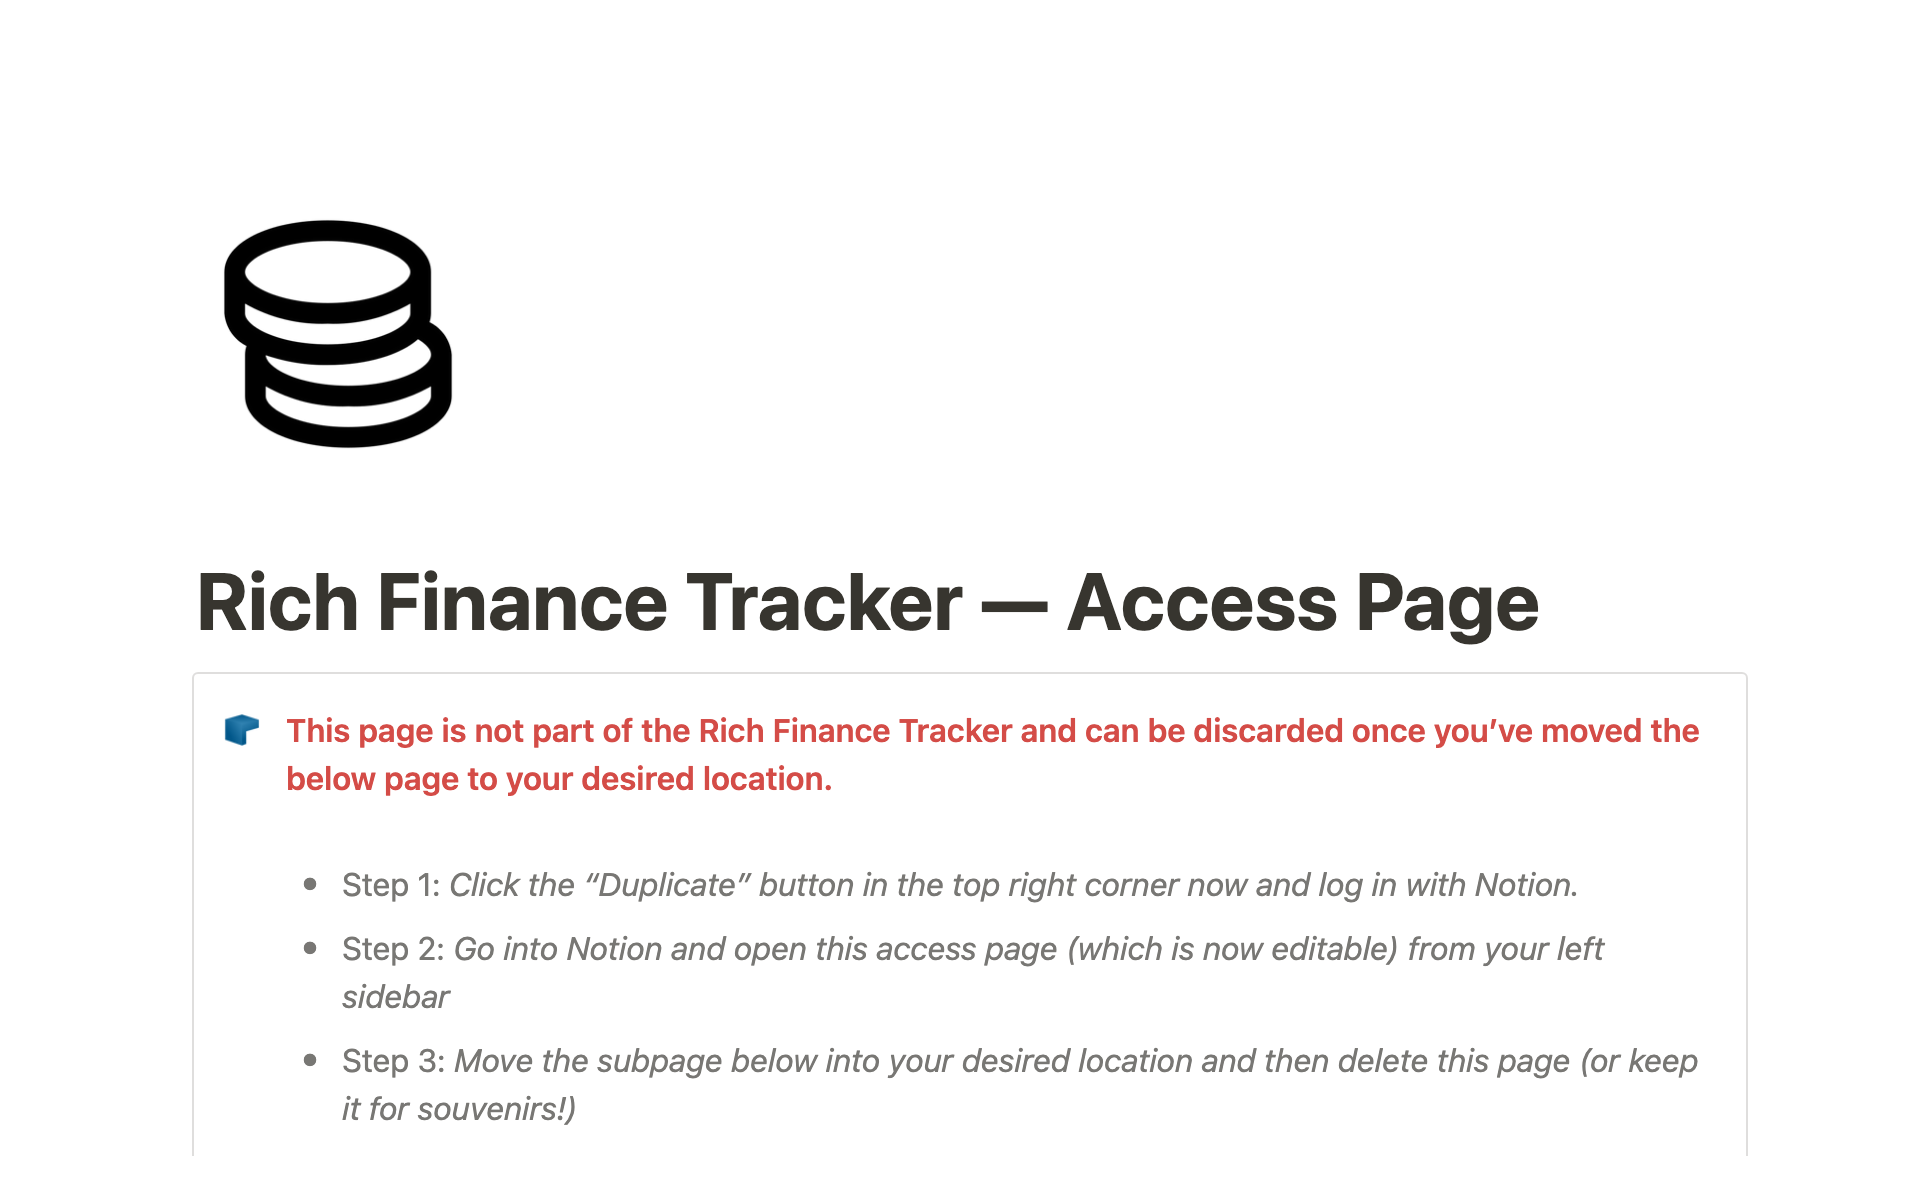 Automate your finance tracking in Notion